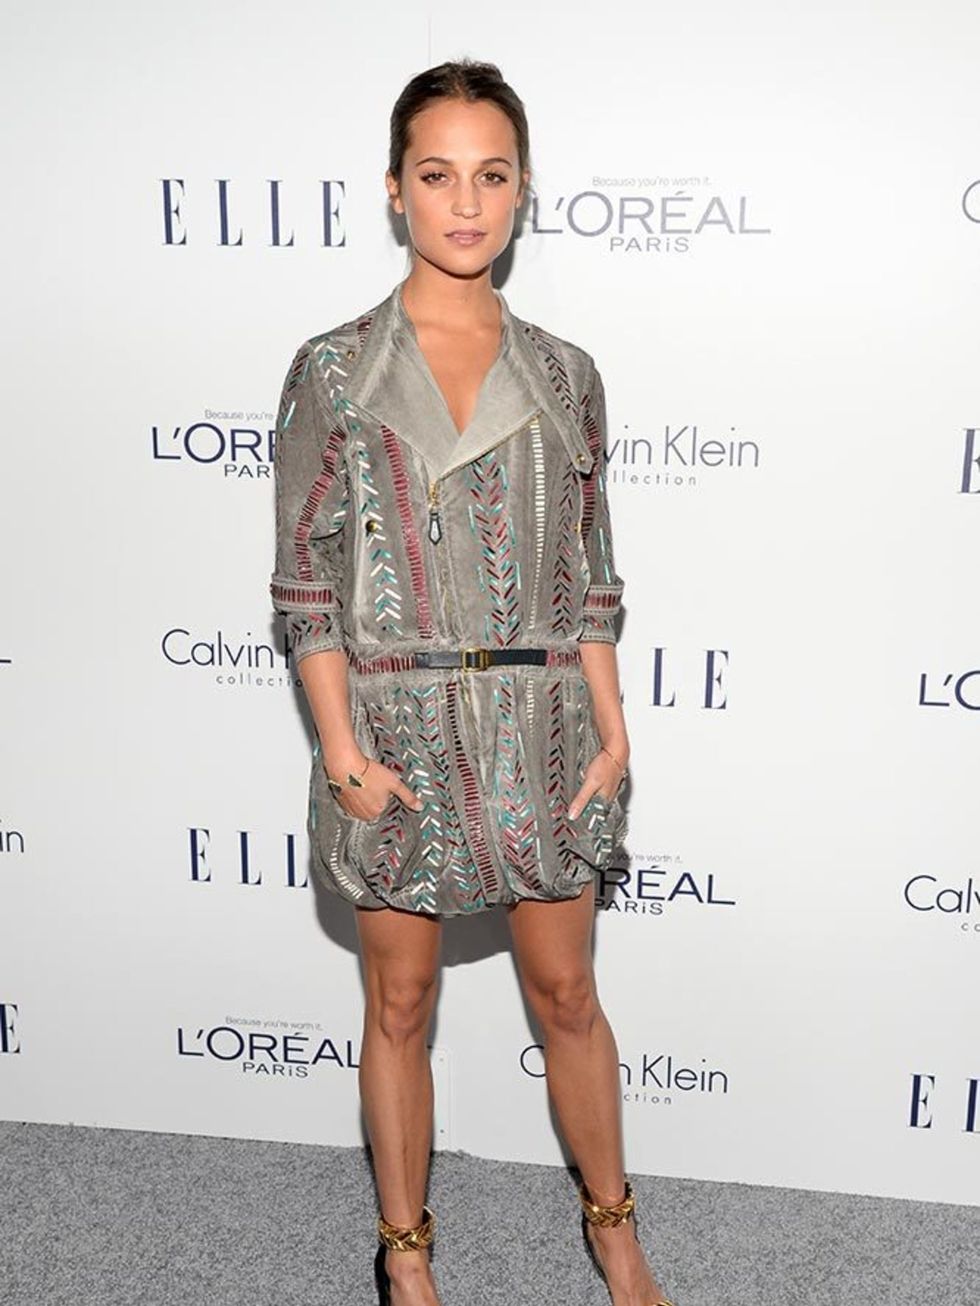 Alicia Vikander attends the 22nd Annual ELLE Women in Hollywood event in LA, October 2015.